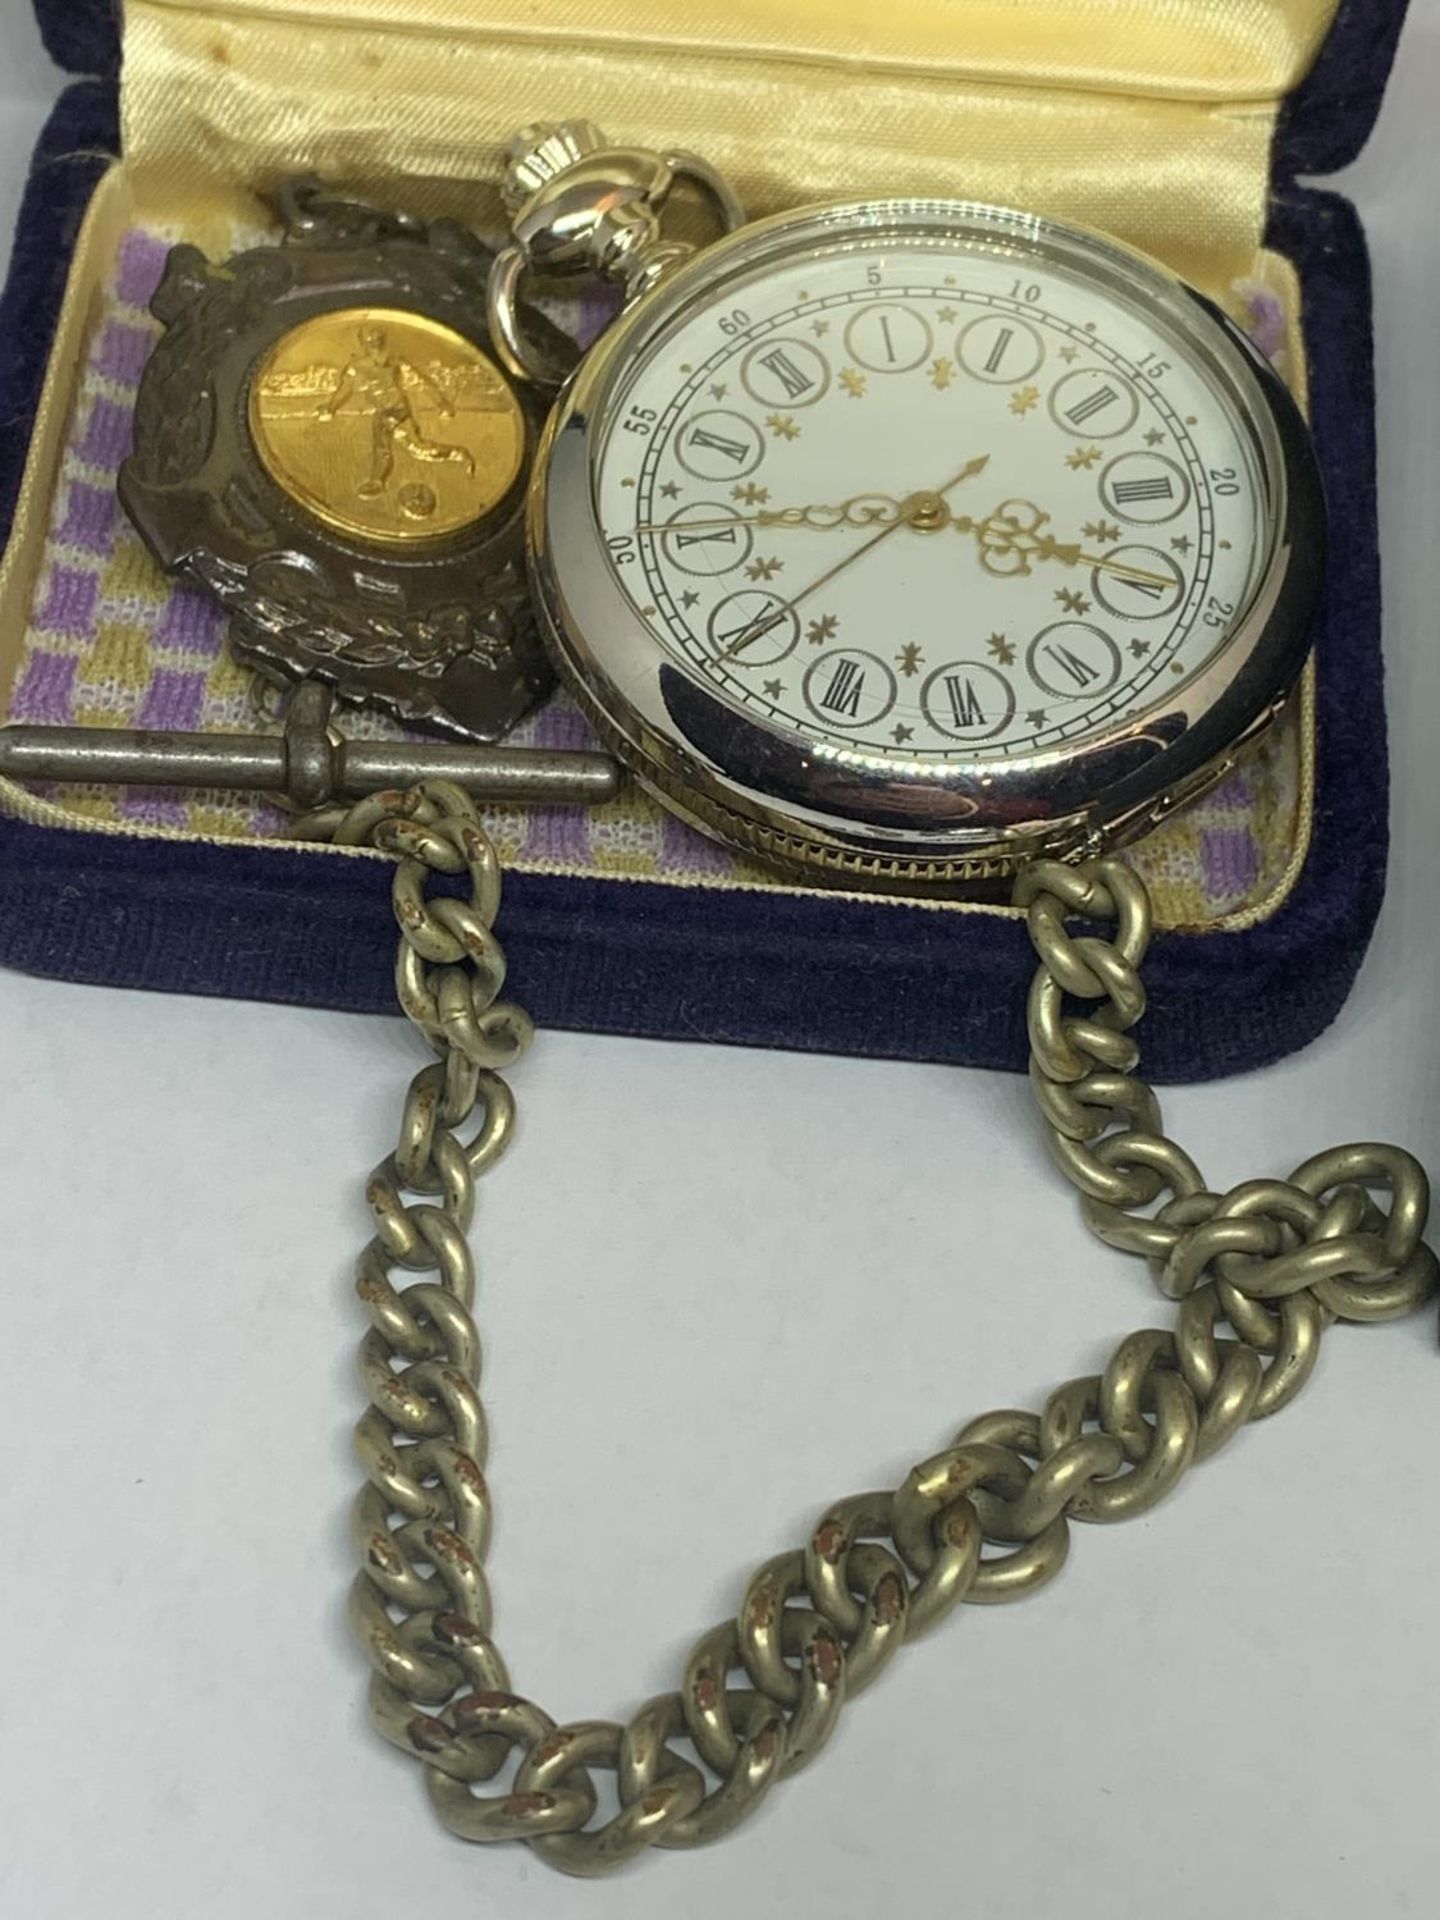 THREE VARIOUS POCKETS WATCHES - ONE WITH CHAIN AND FOOTBALL MEDAL FOB, ONE WITH CHAIN AND ST - Image 4 of 7